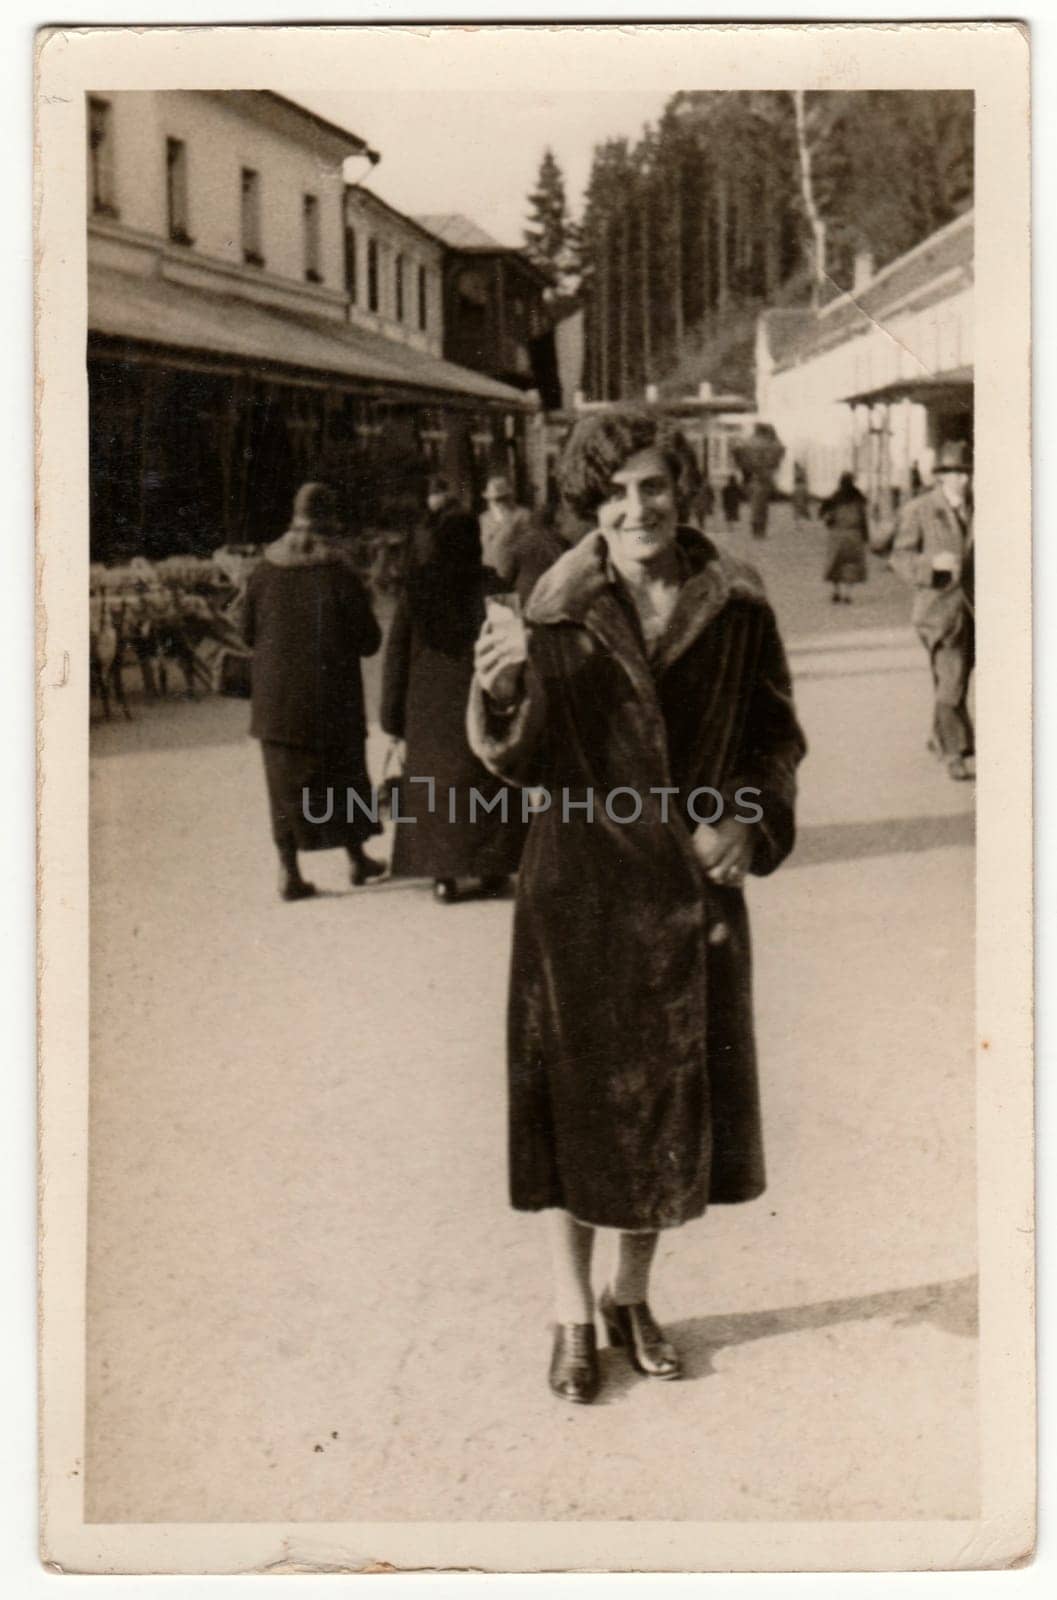 Vintage photo shows woman wears a fur coat, goes for a walk Retro black and white phortgraphy. by roman_nerud